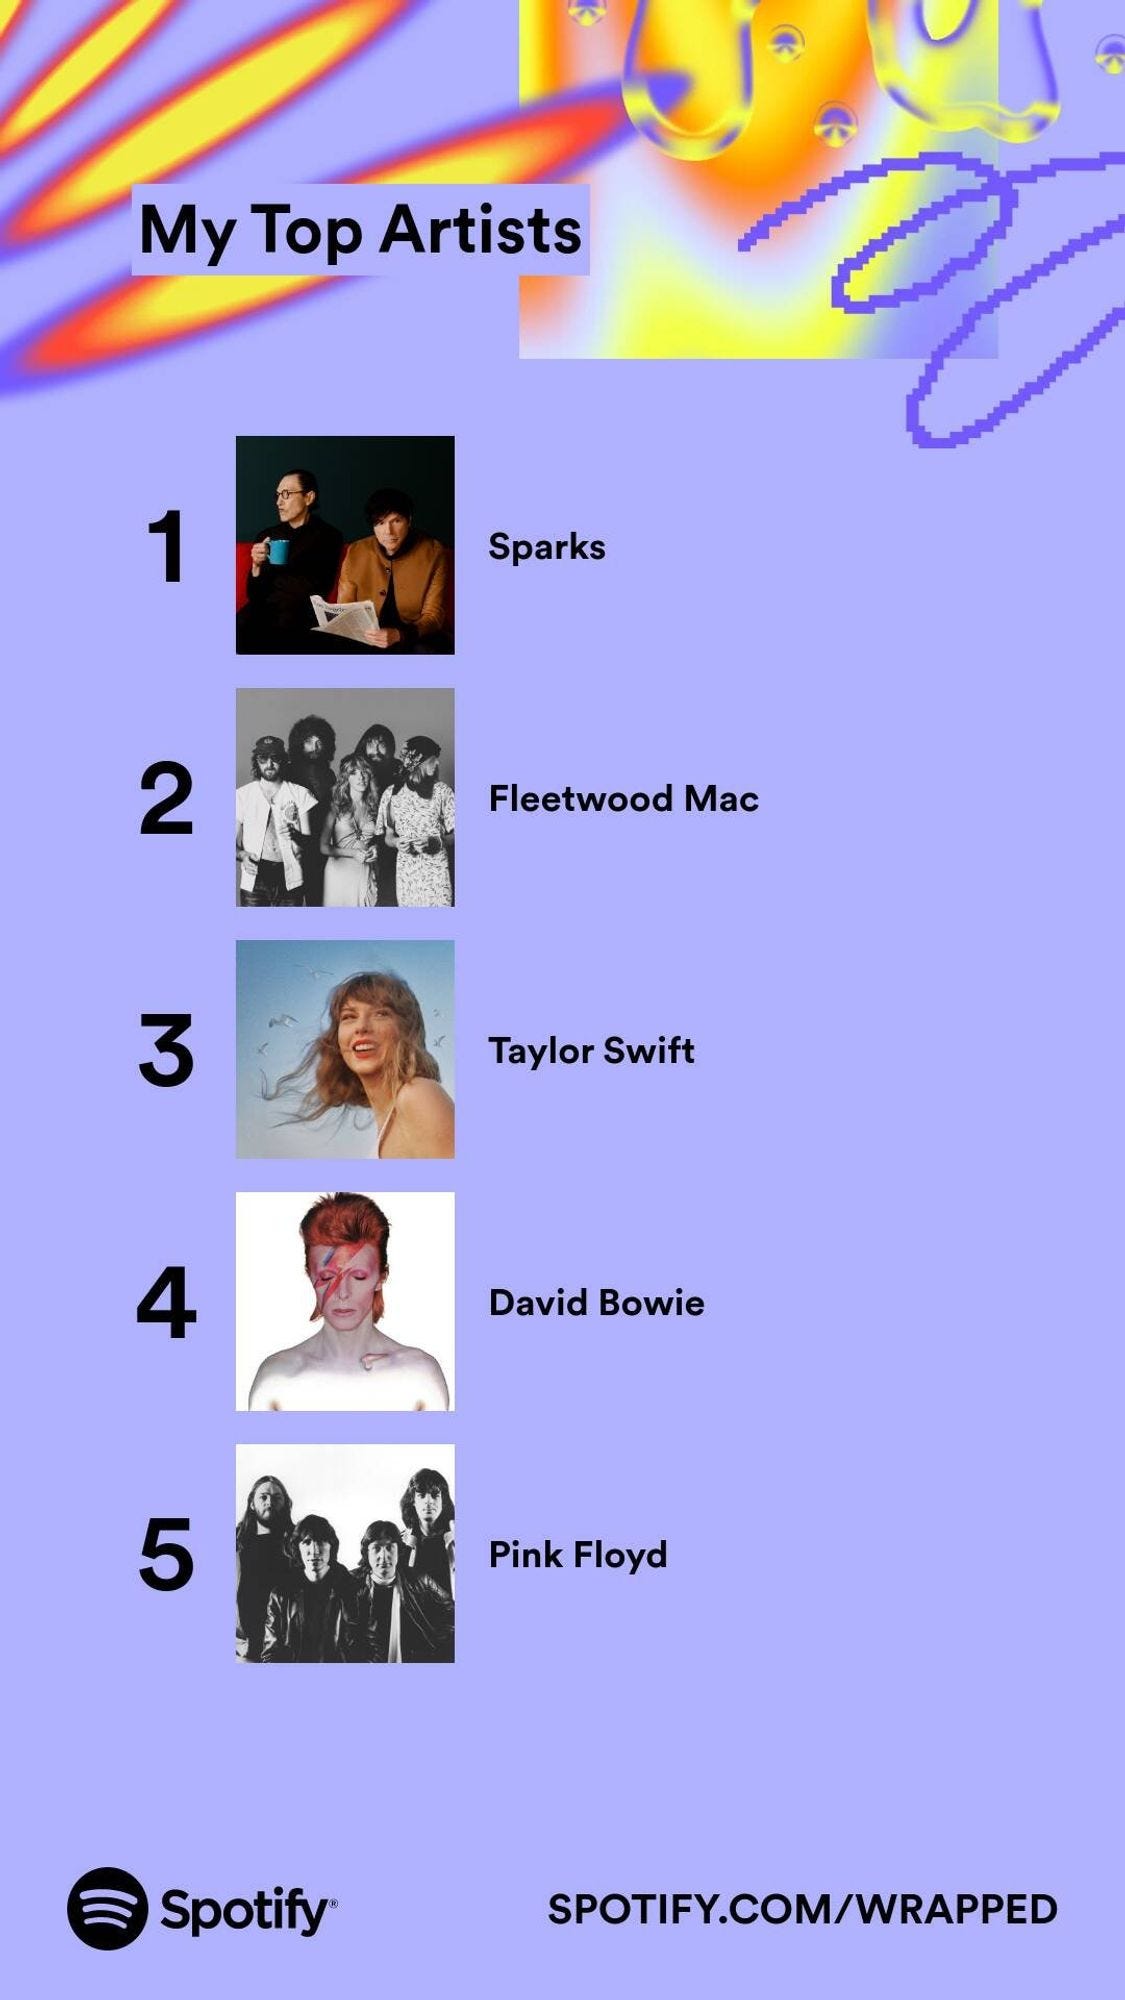 My Wrapped 2023 top artists: Sparks, Fleetwood Mac, Taylor Swift, David Bowie, and Pink Floyd